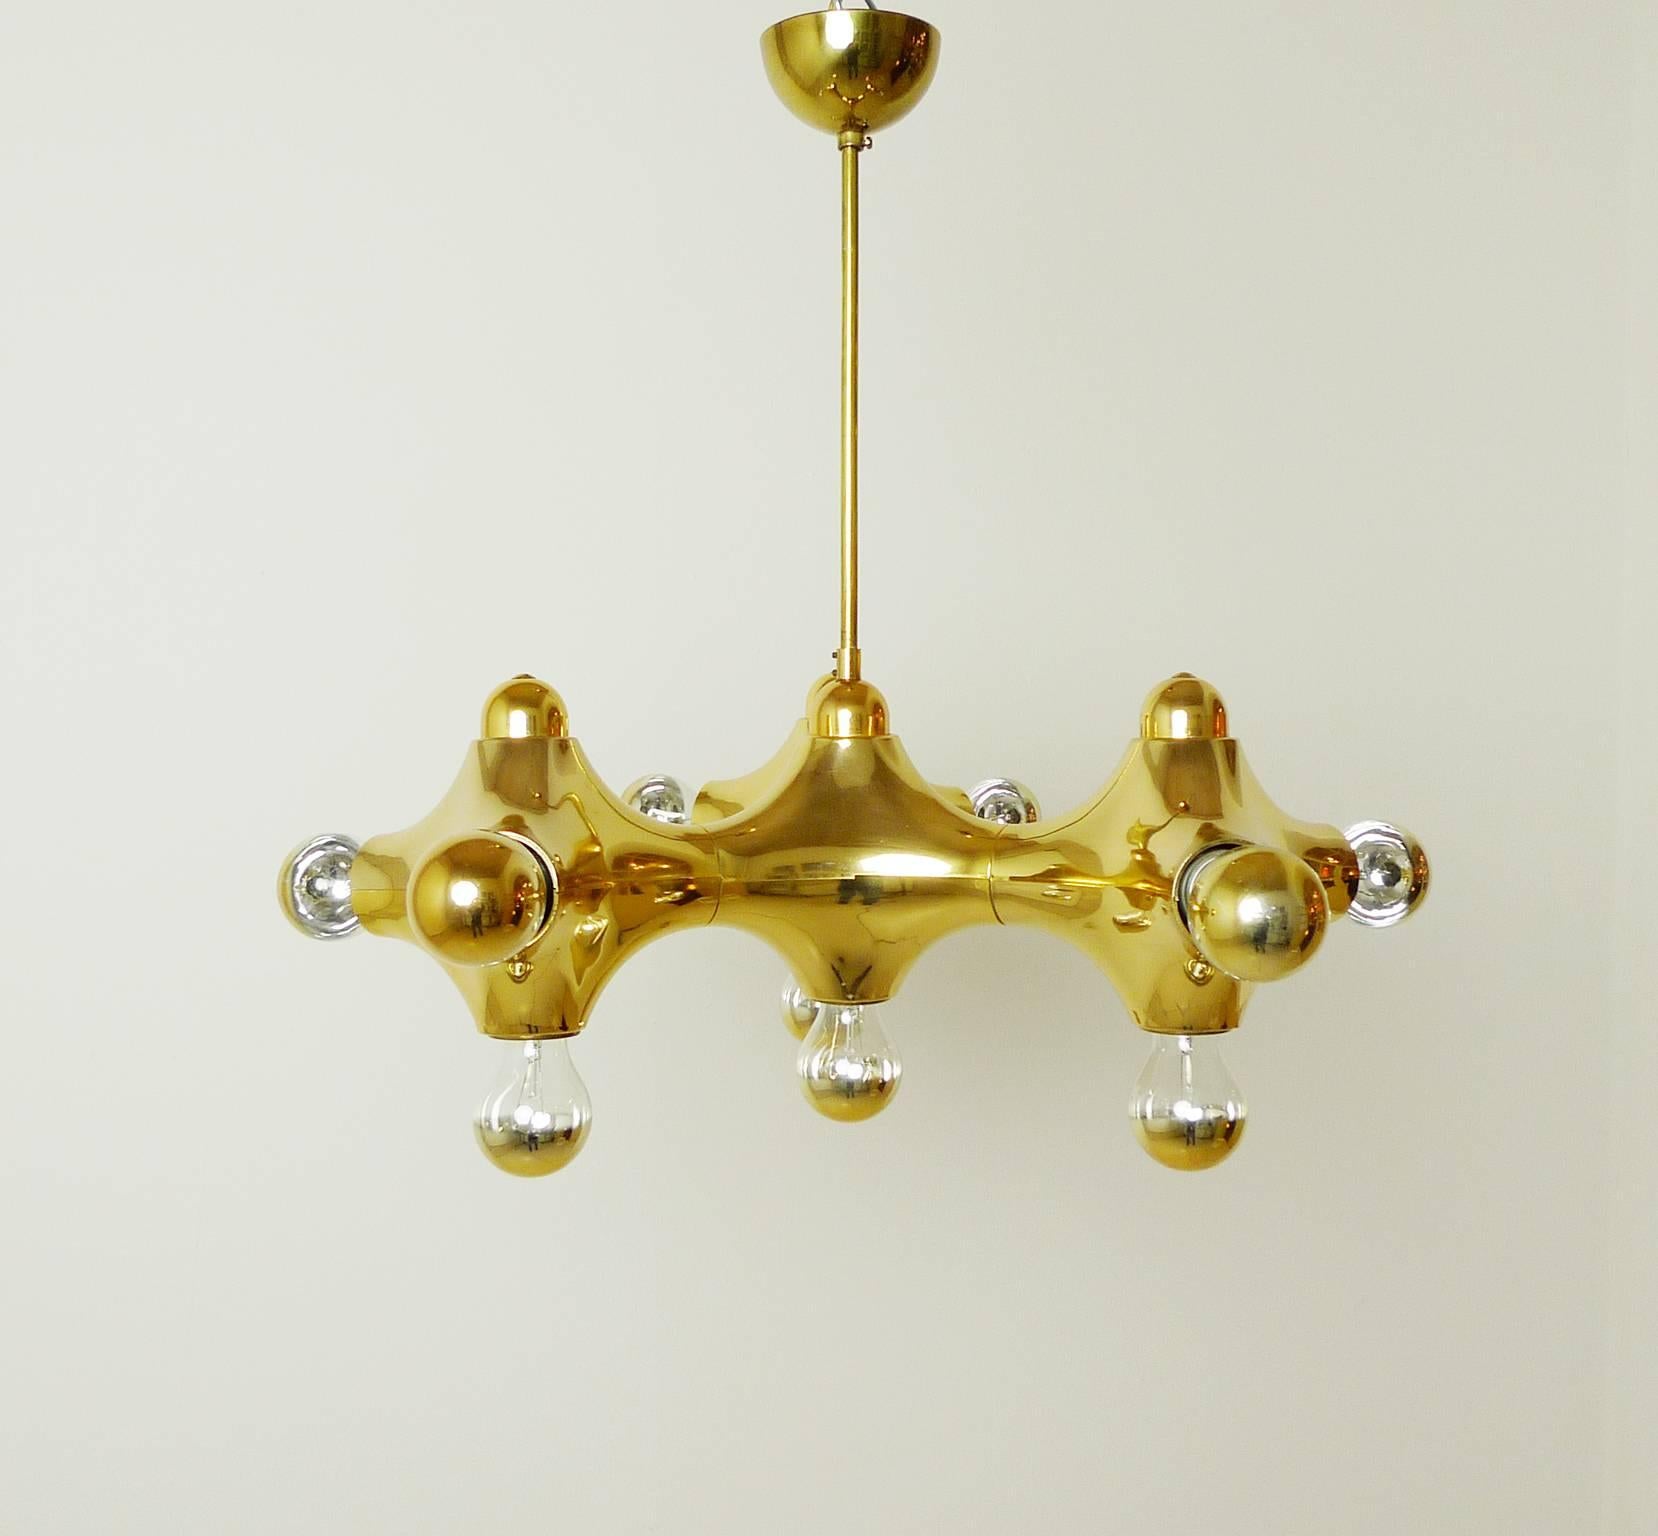 Space Age Large Pendant Lamp in the Shape of a Golden Molecule by Cosack, Germany, 1970s For Sale